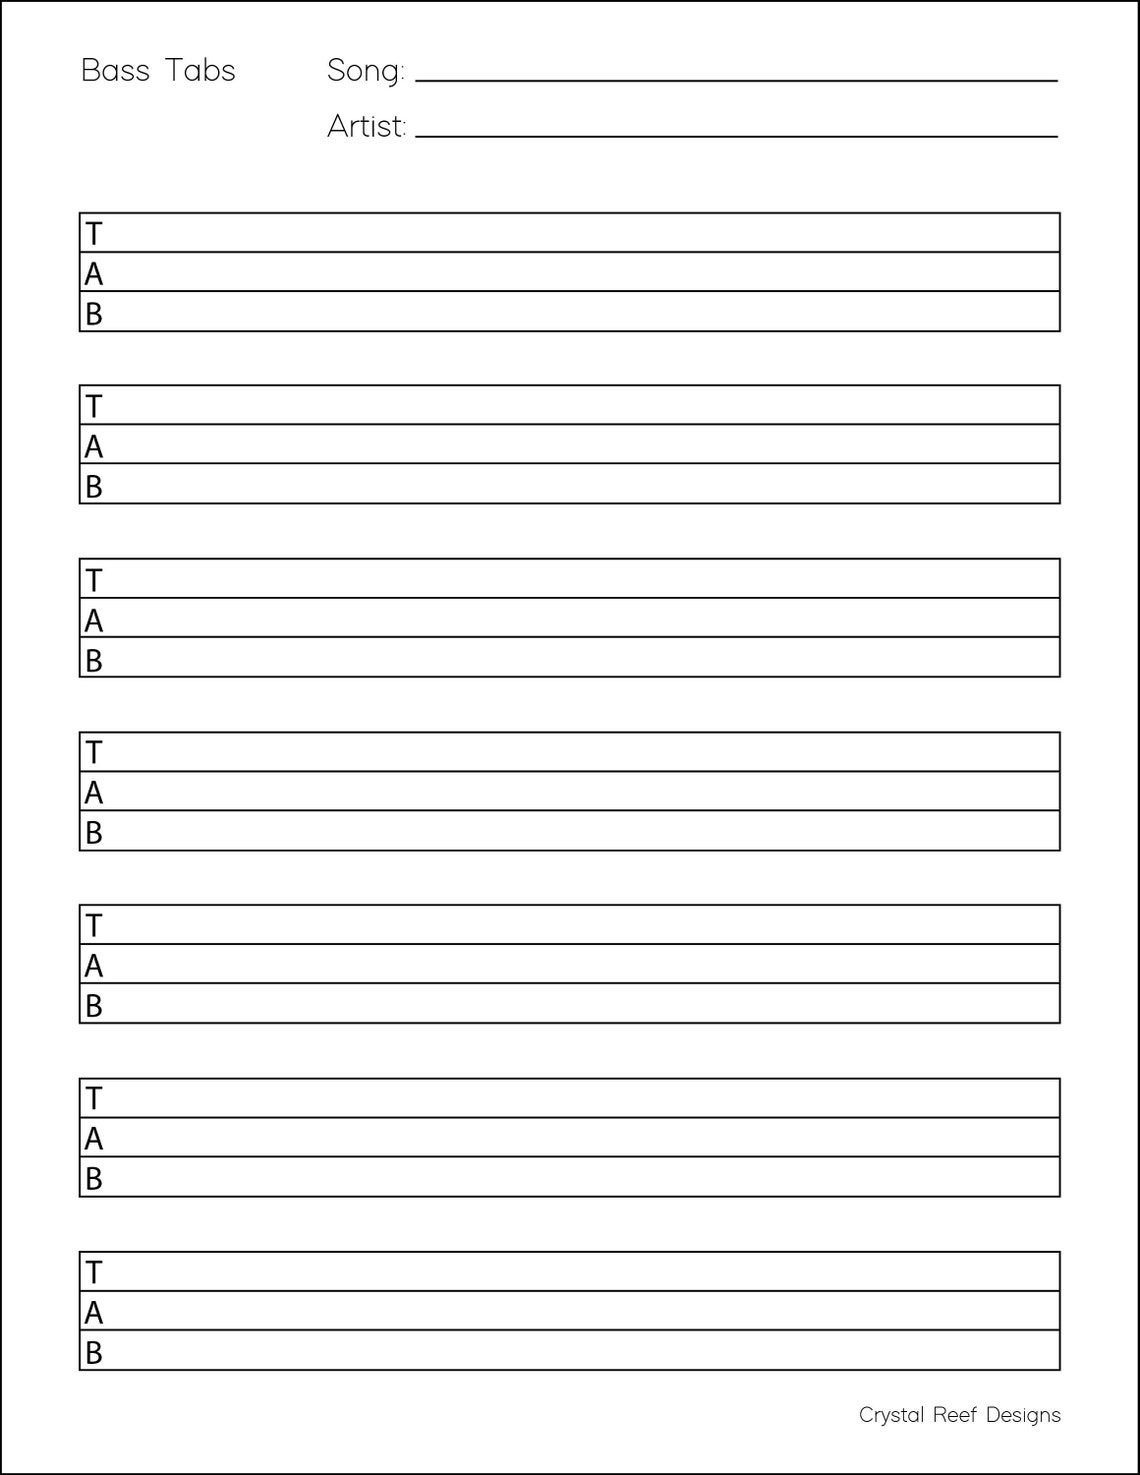 bass-blank-tabs-instant-printable-download-etsy